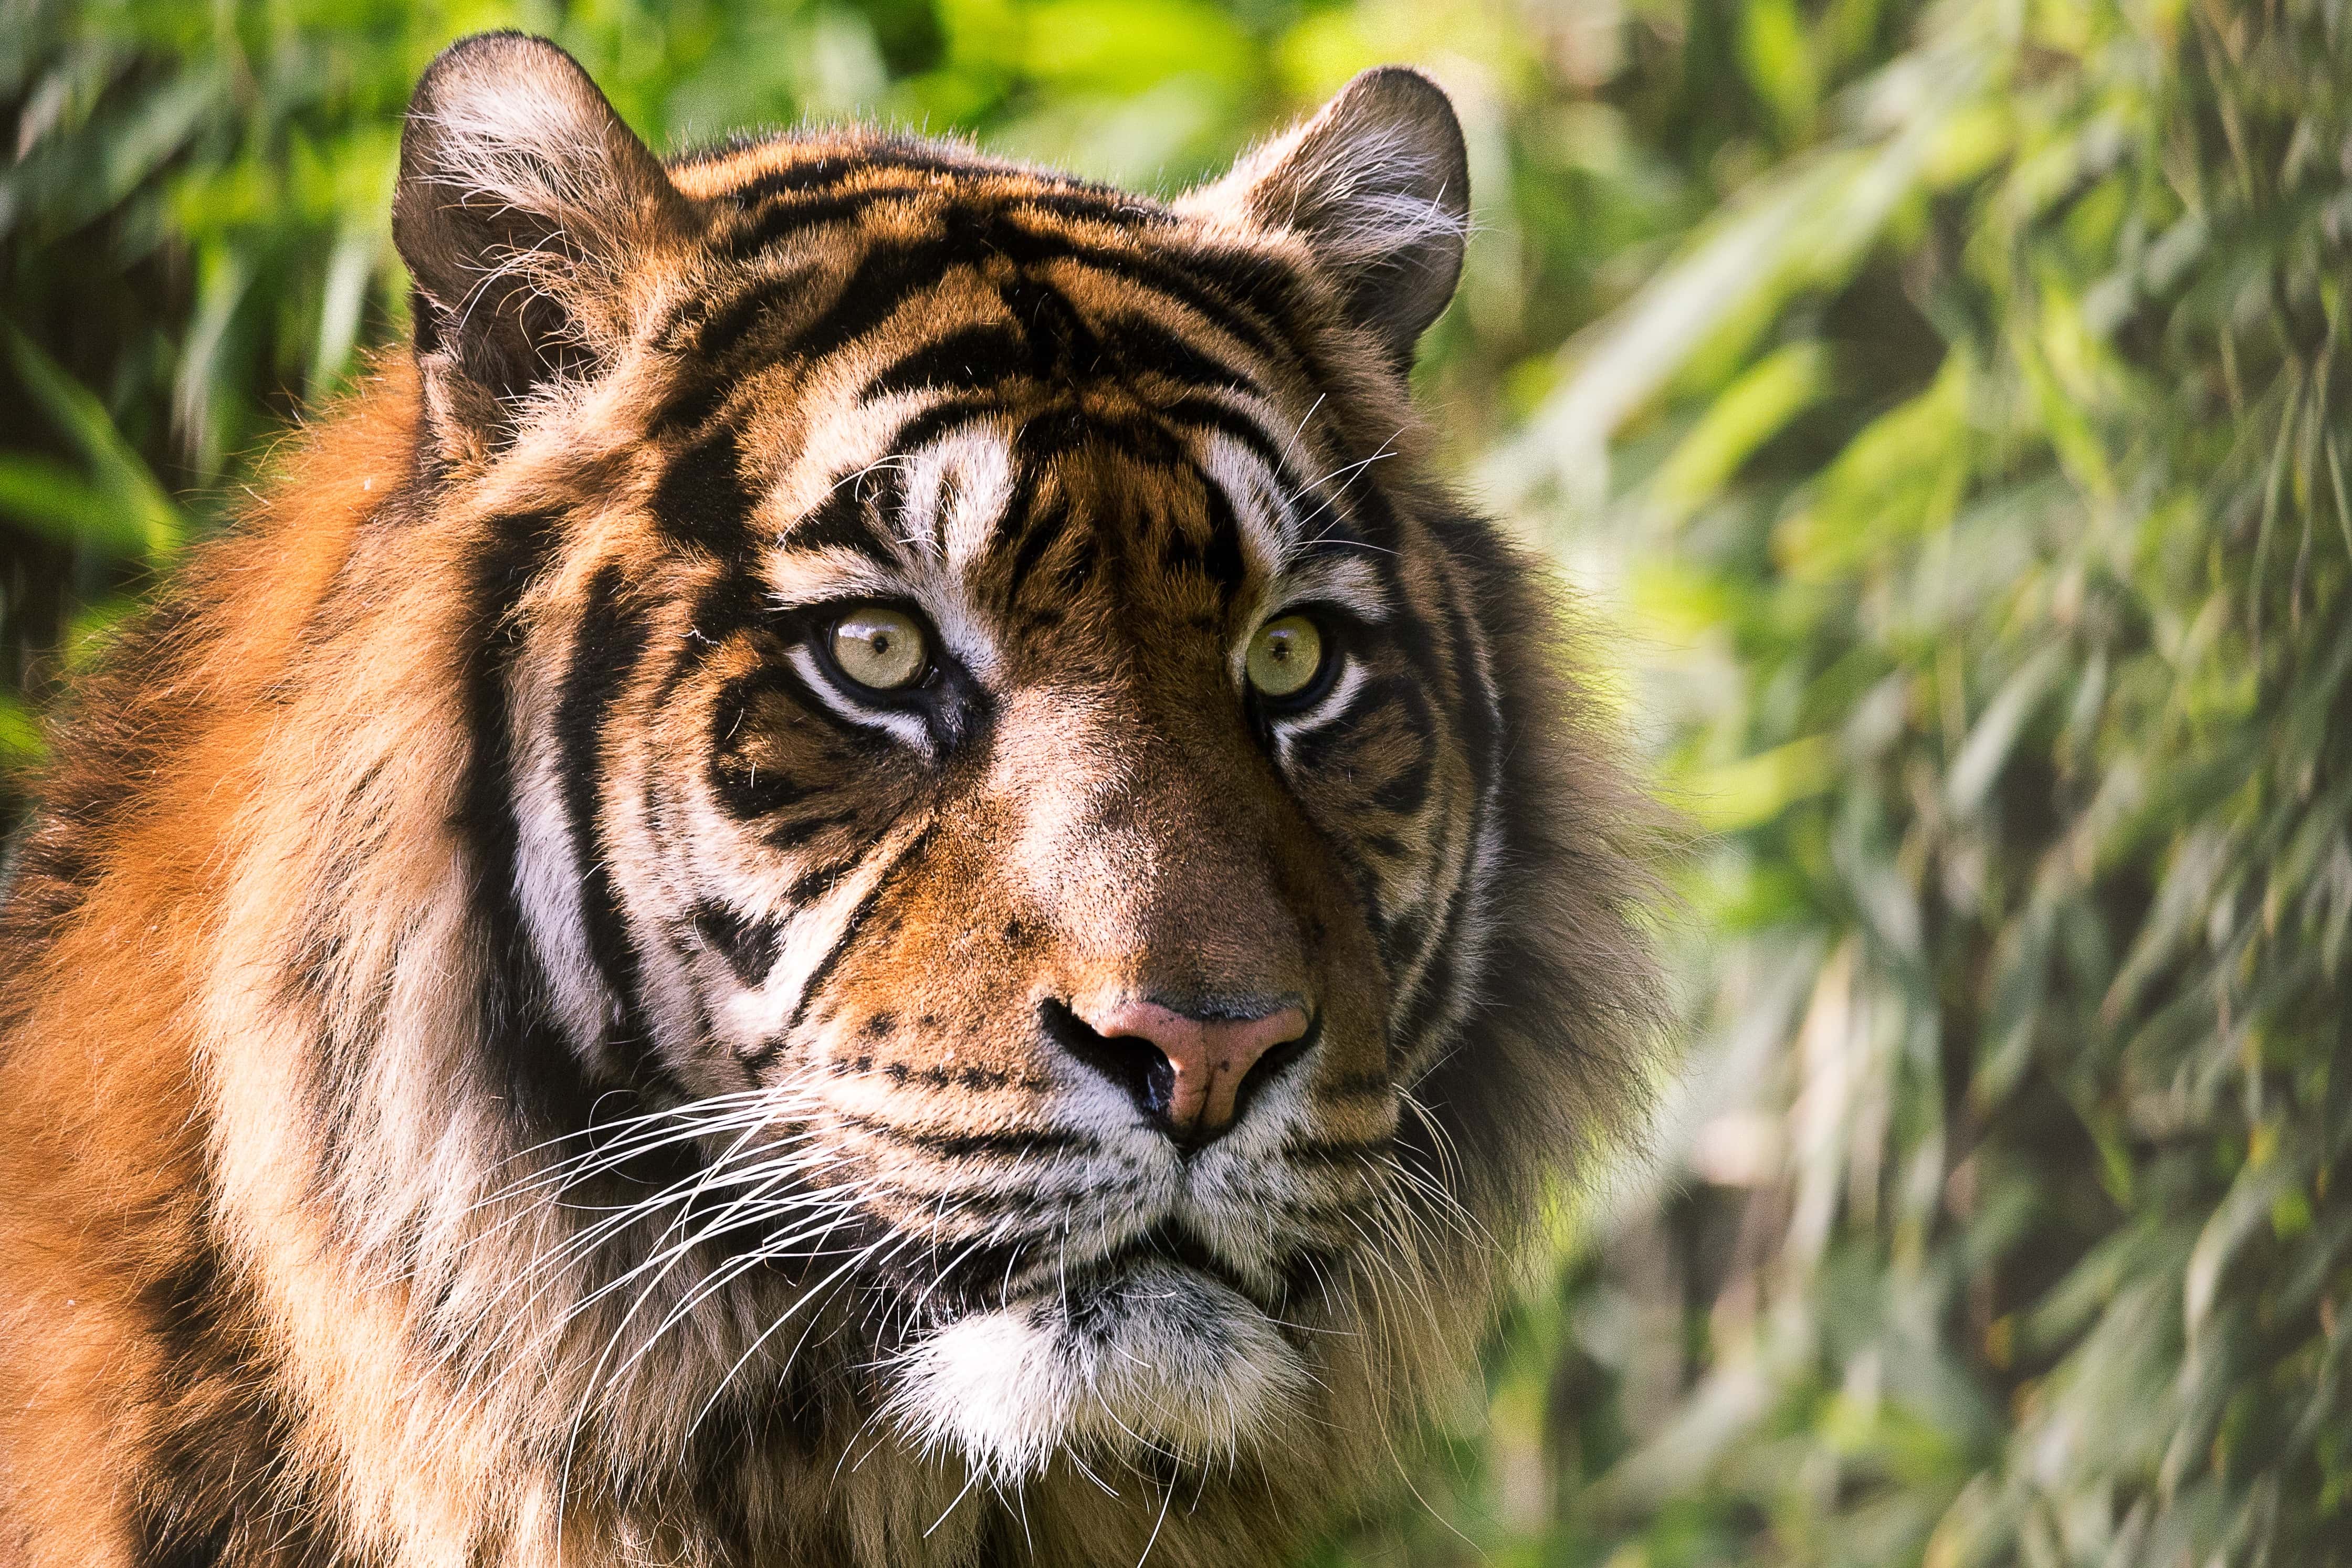 New By-law Bans Zoos & Animal Circuses in Sault Ste. Marie